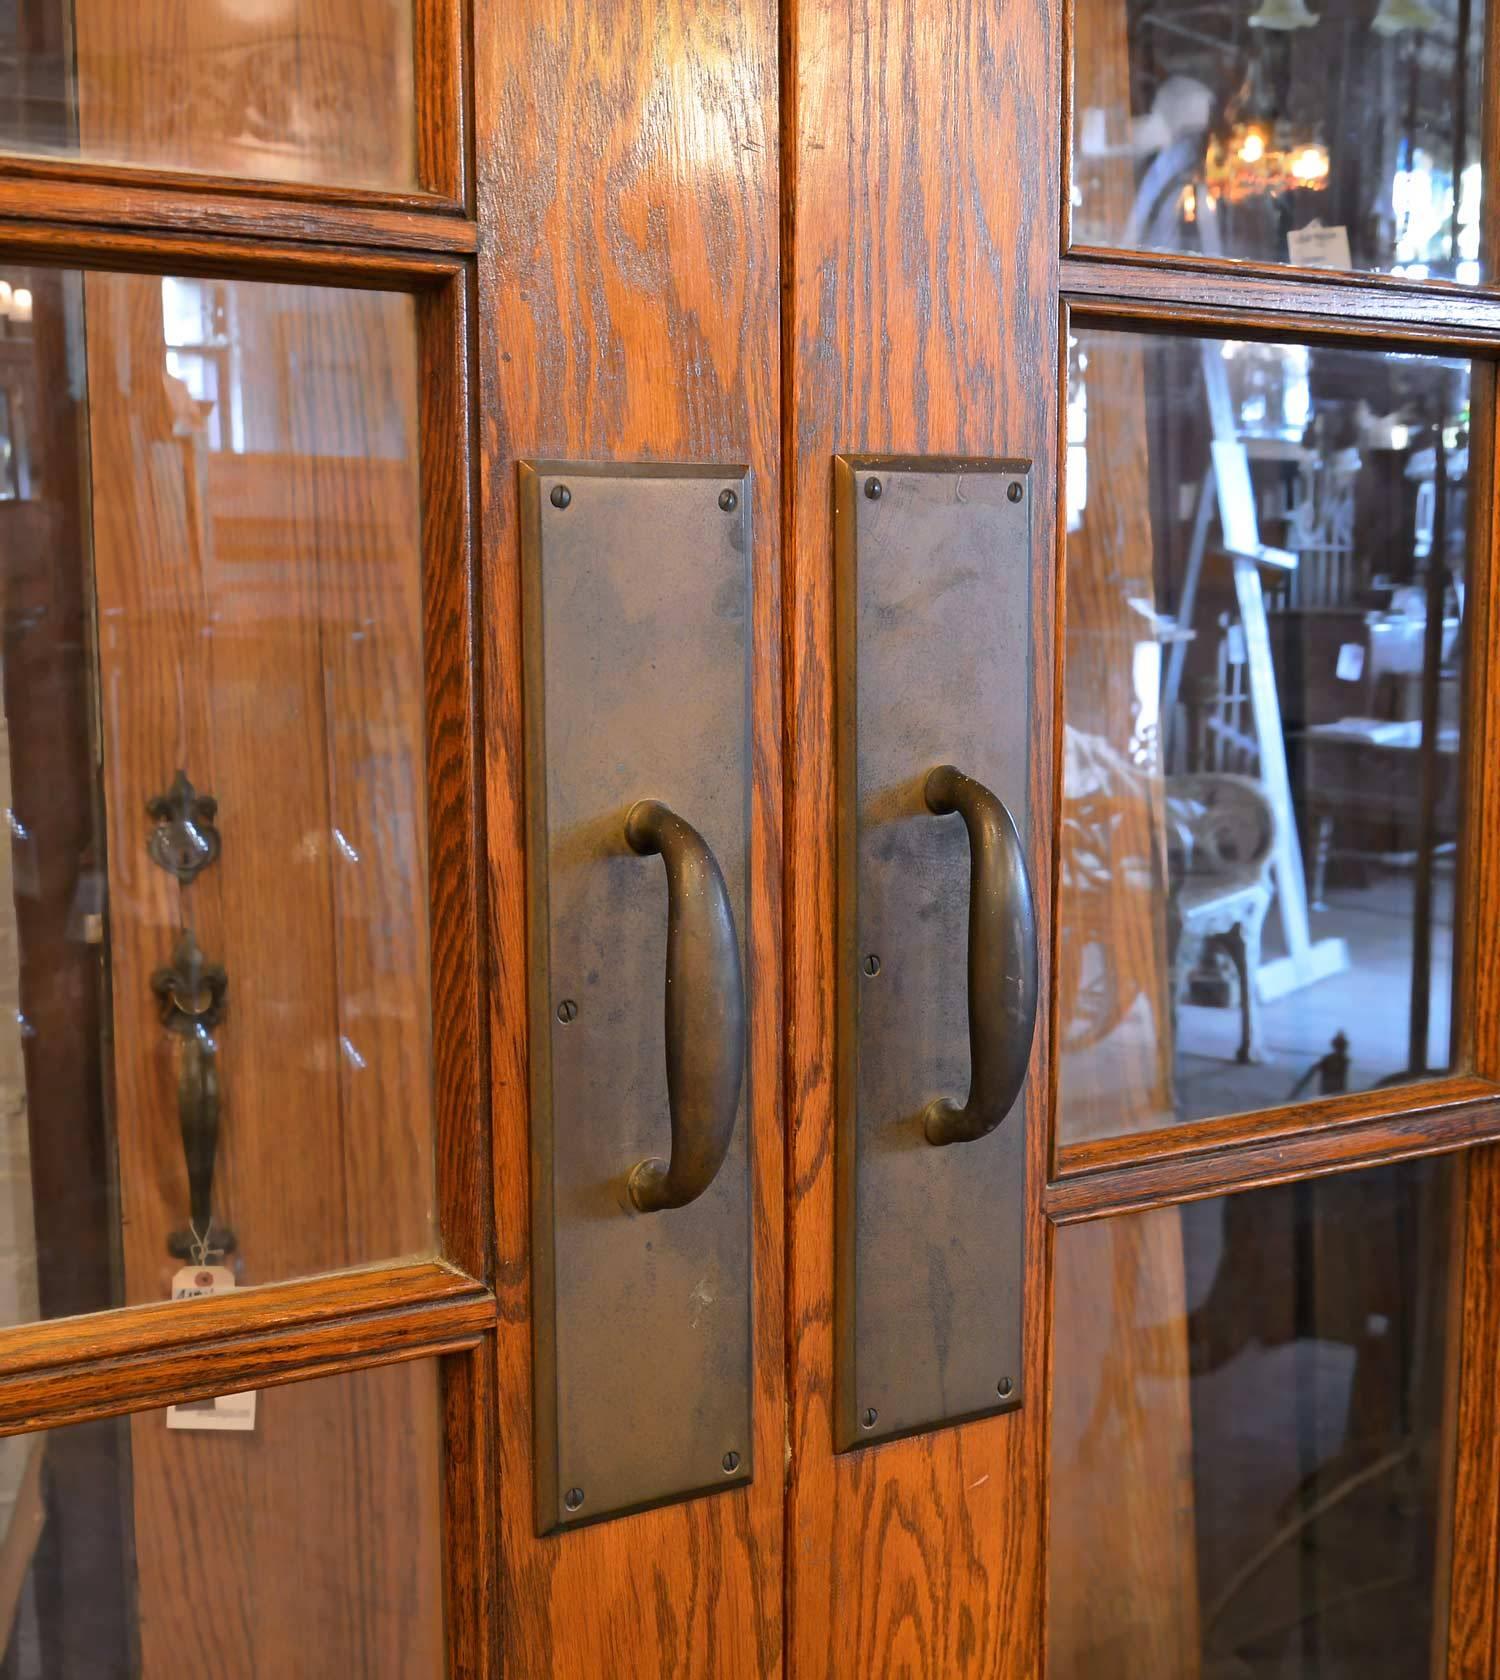 Originally from a school, this door is the epidome of early commercial construction. Red oak with a pronounced grain was used to frame out the multiple panels of original wavy glass. Perfect for new construction, residential or otherwise. Doors